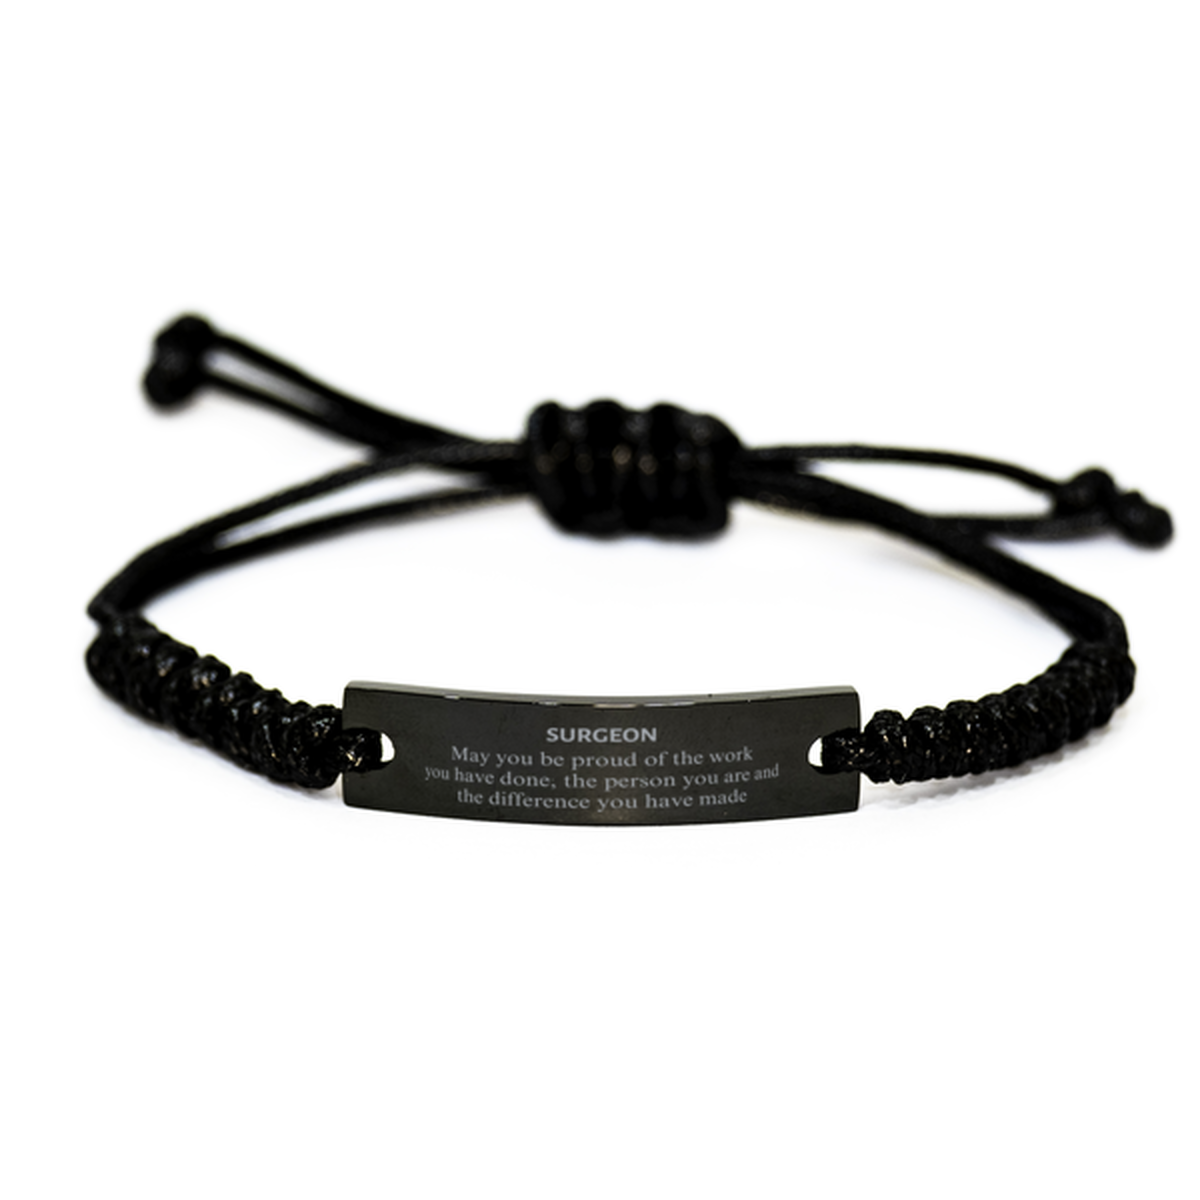 Surgeon May you be proud of the work you have done, Retirement Surgeon Black Rope Bracelet for Colleague Appreciation Gifts Amazing for Surgeon